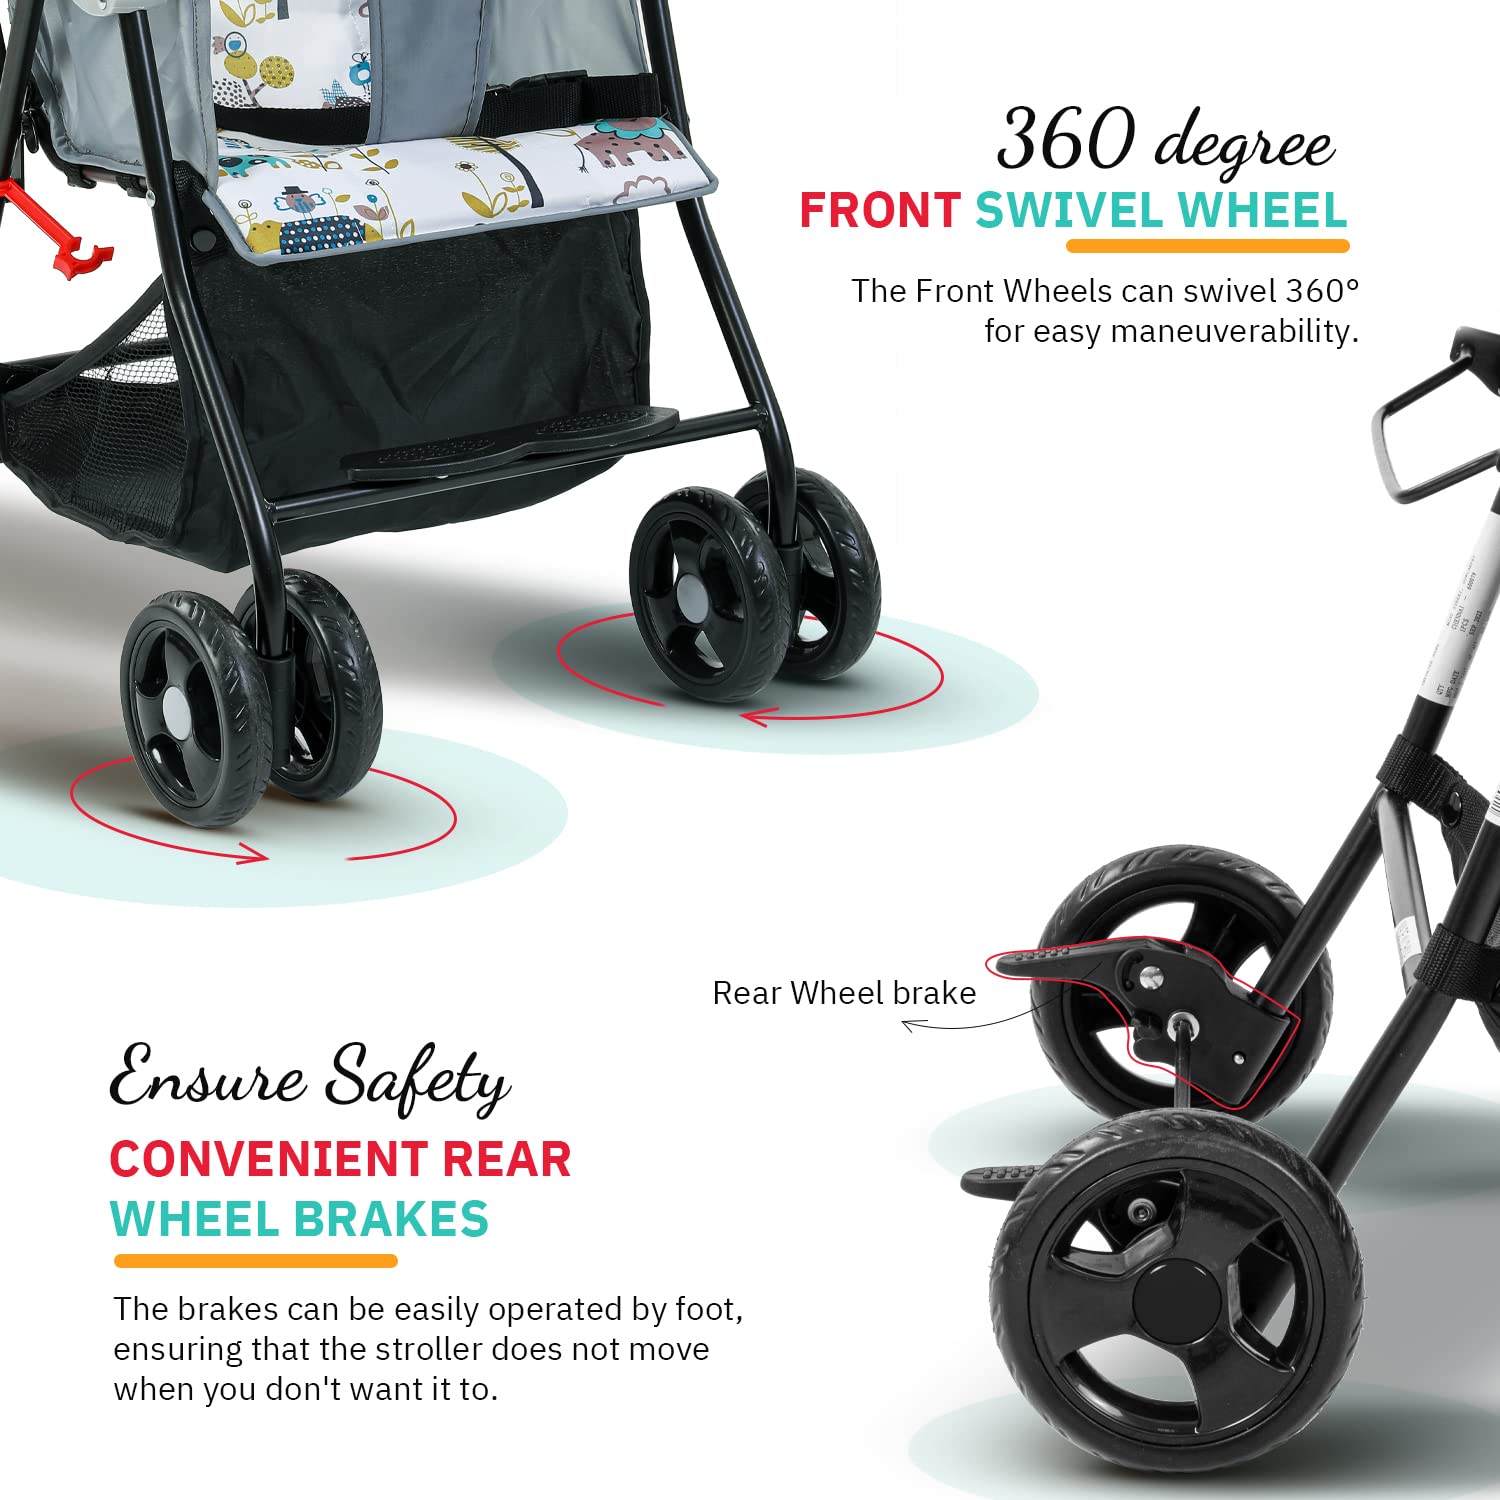 Taro Infant Baby Foldable Stroller. Travel friendly Cabin Size. NB - 3 Years (Grey)